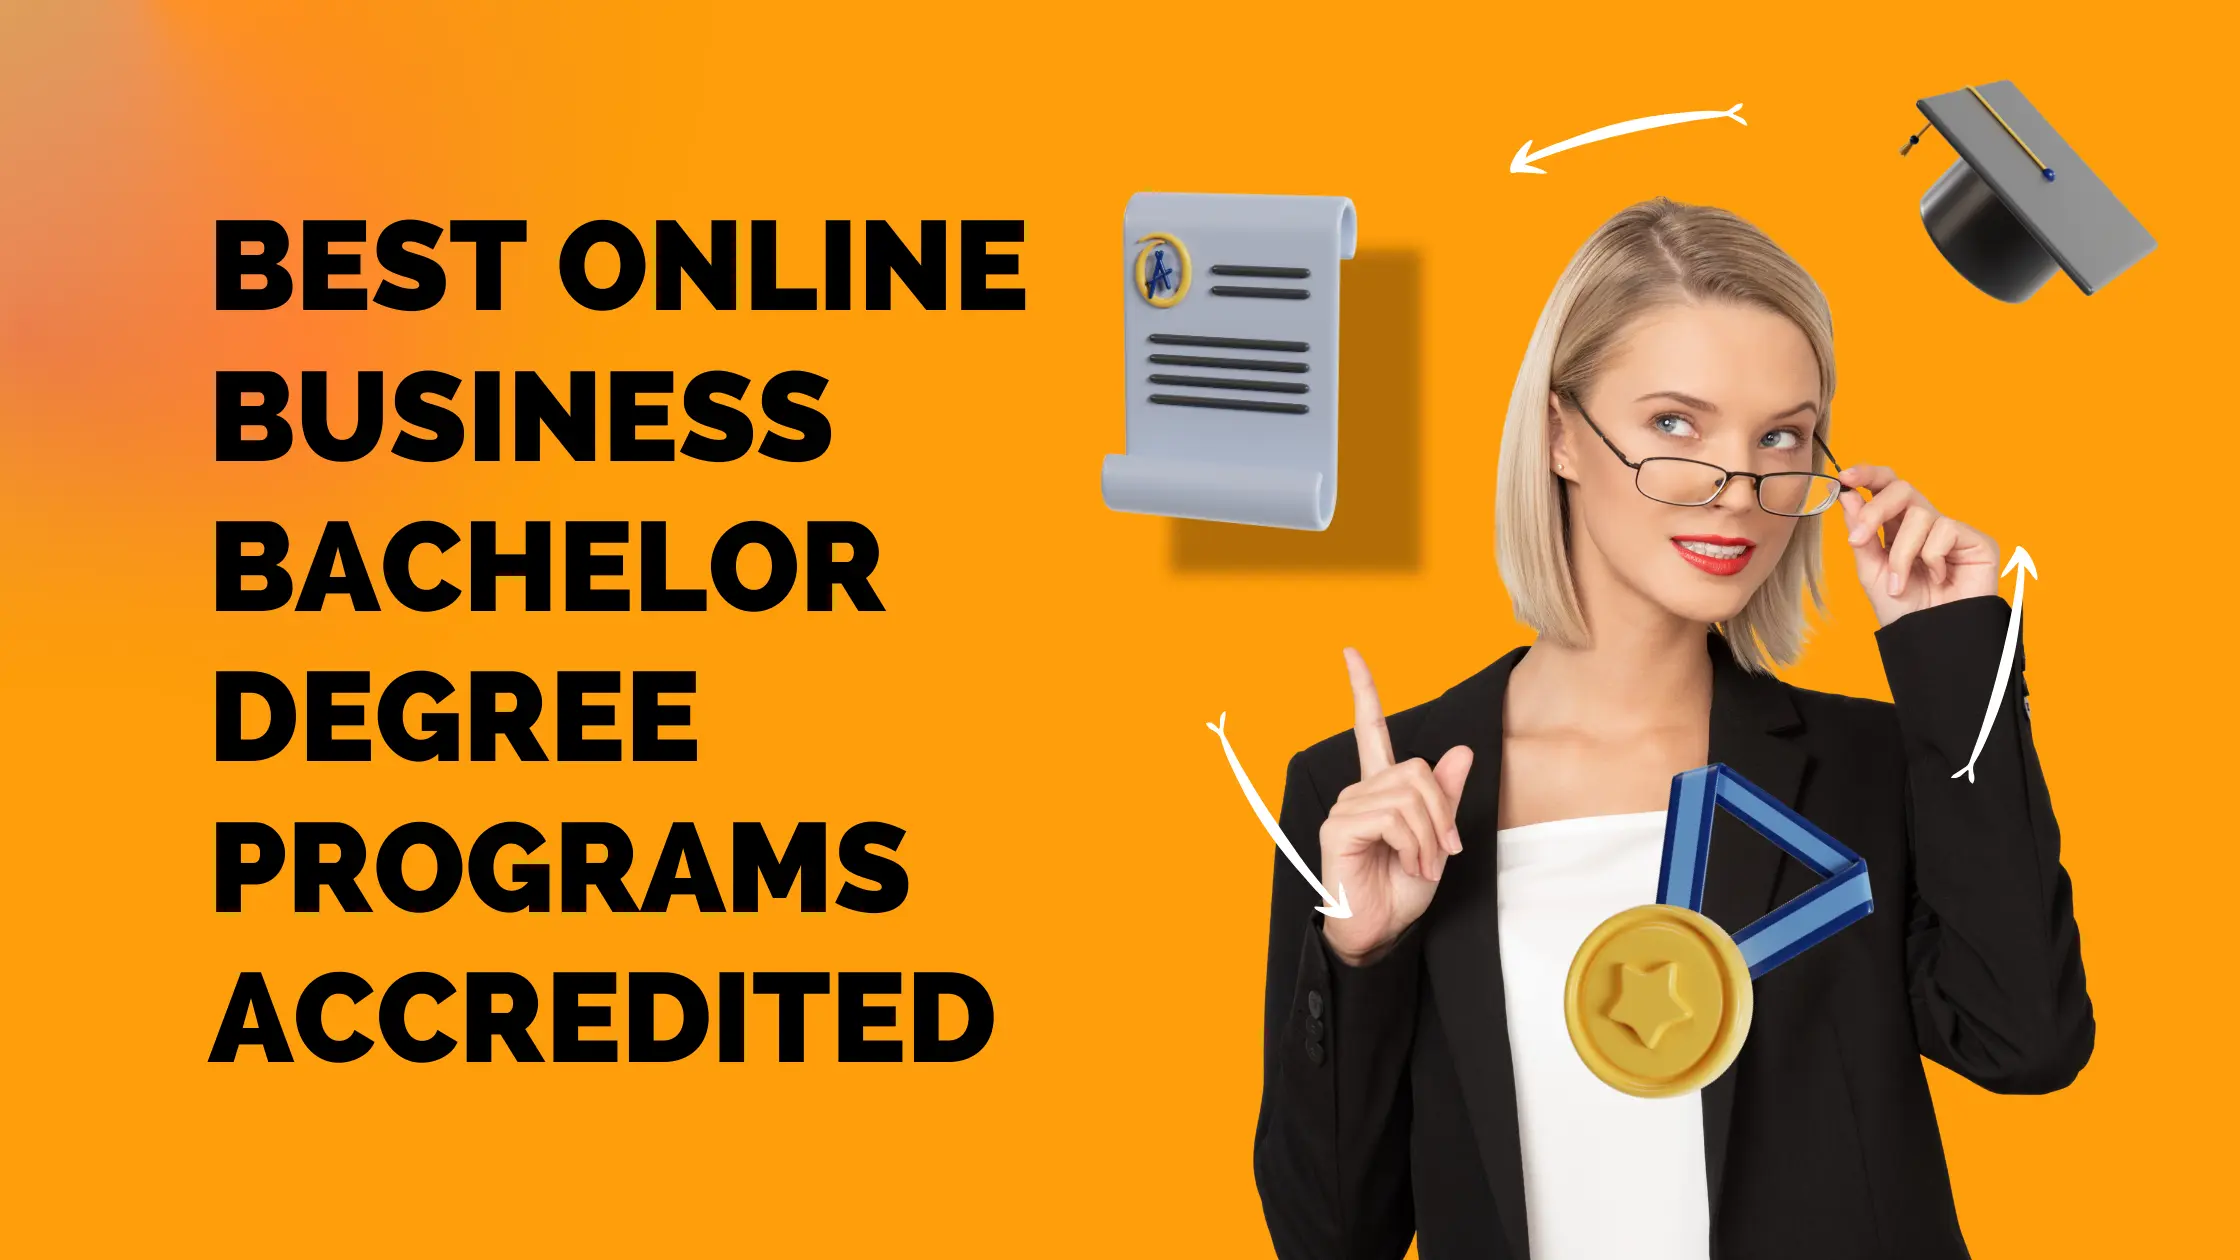 Best Online Business Bachelor Degree Programs Accredited